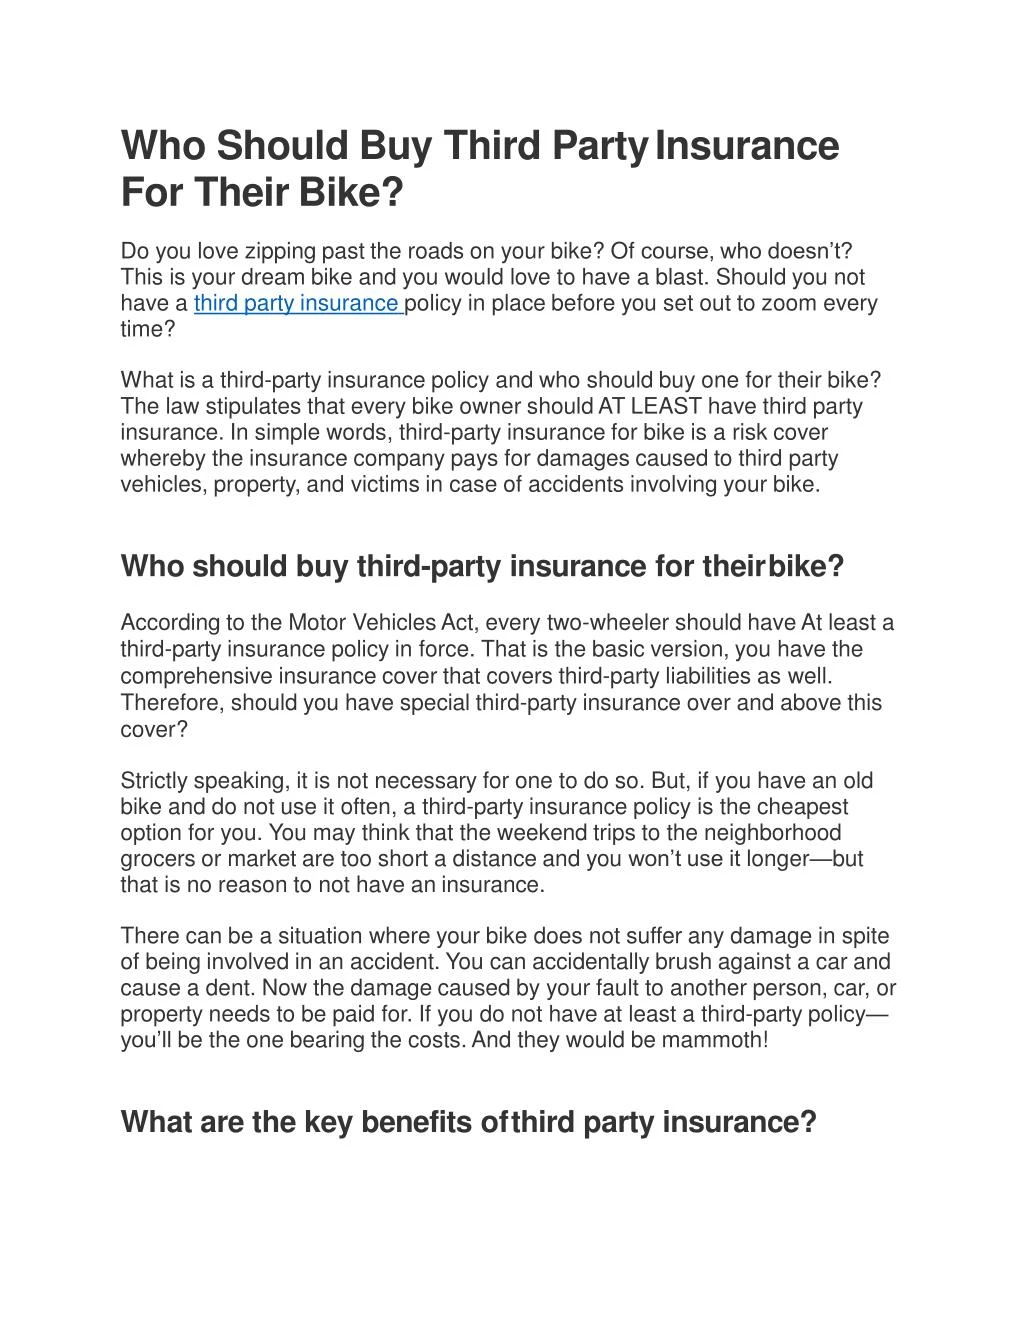 who should buy third party insurance for their bike